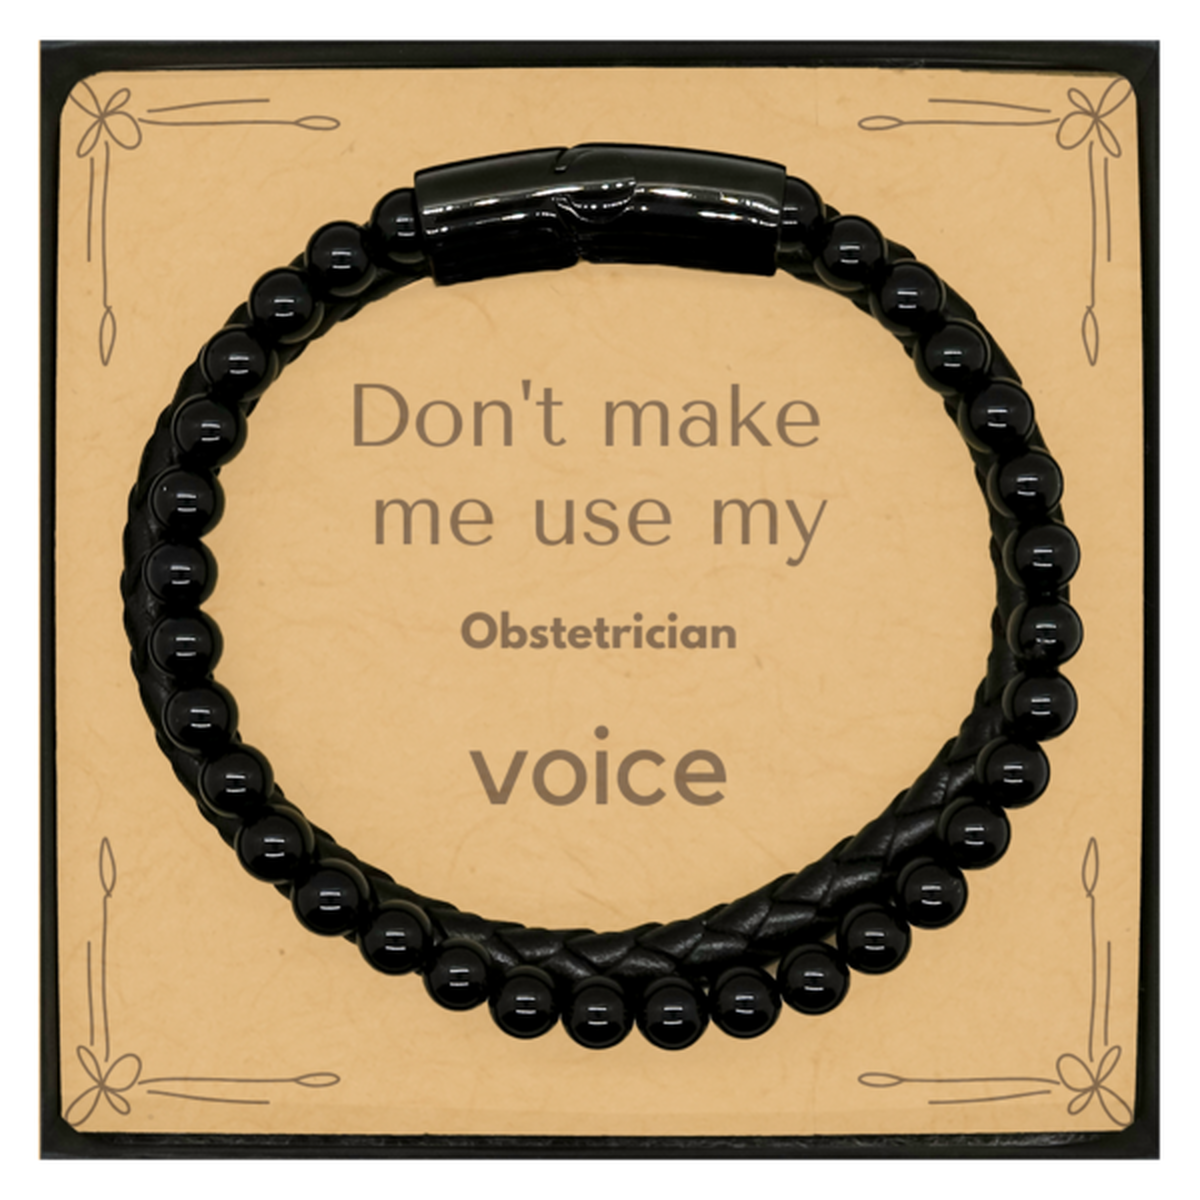 Don't make me use my Obstetrician voice, Sarcasm Obstetrician Card Gifts, Christmas Obstetrician Stone Leather Bracelets Birthday Unique Gifts For Obstetrician Coworkers, Men, Women, Colleague, Friends